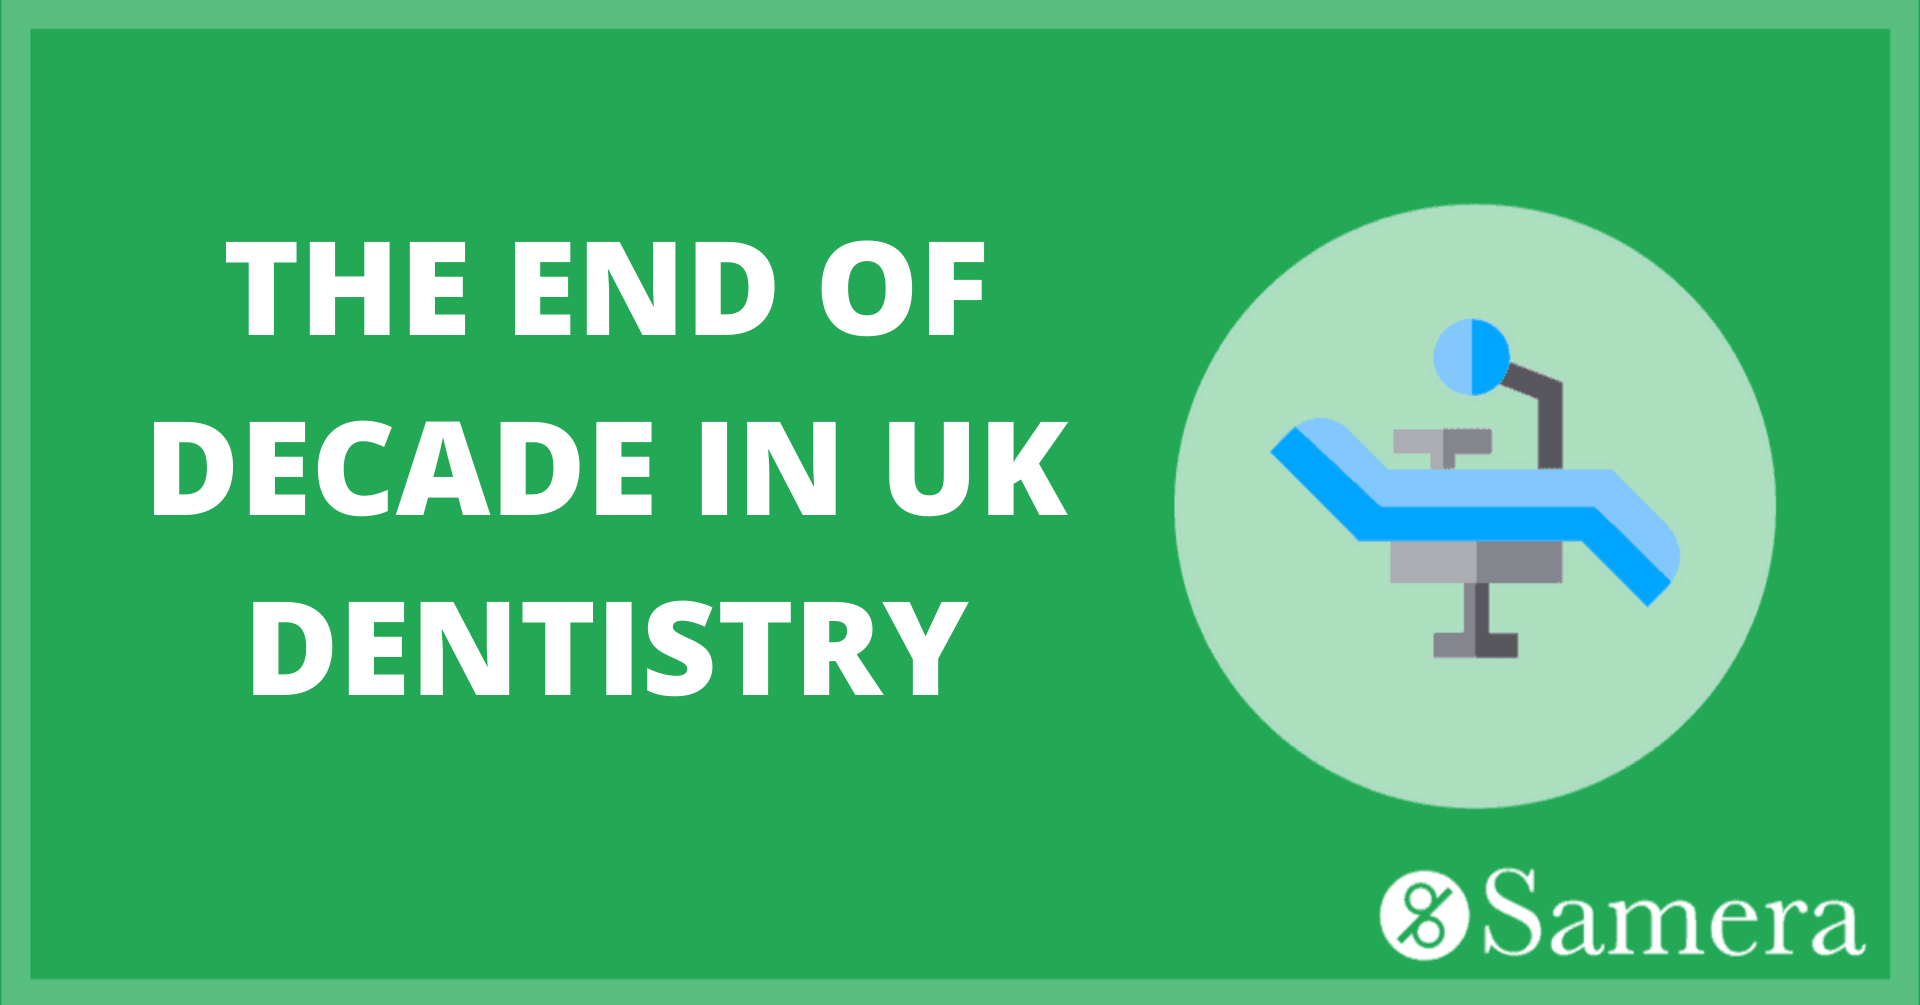 THE END OF DECADE IN UK DENTISTRY